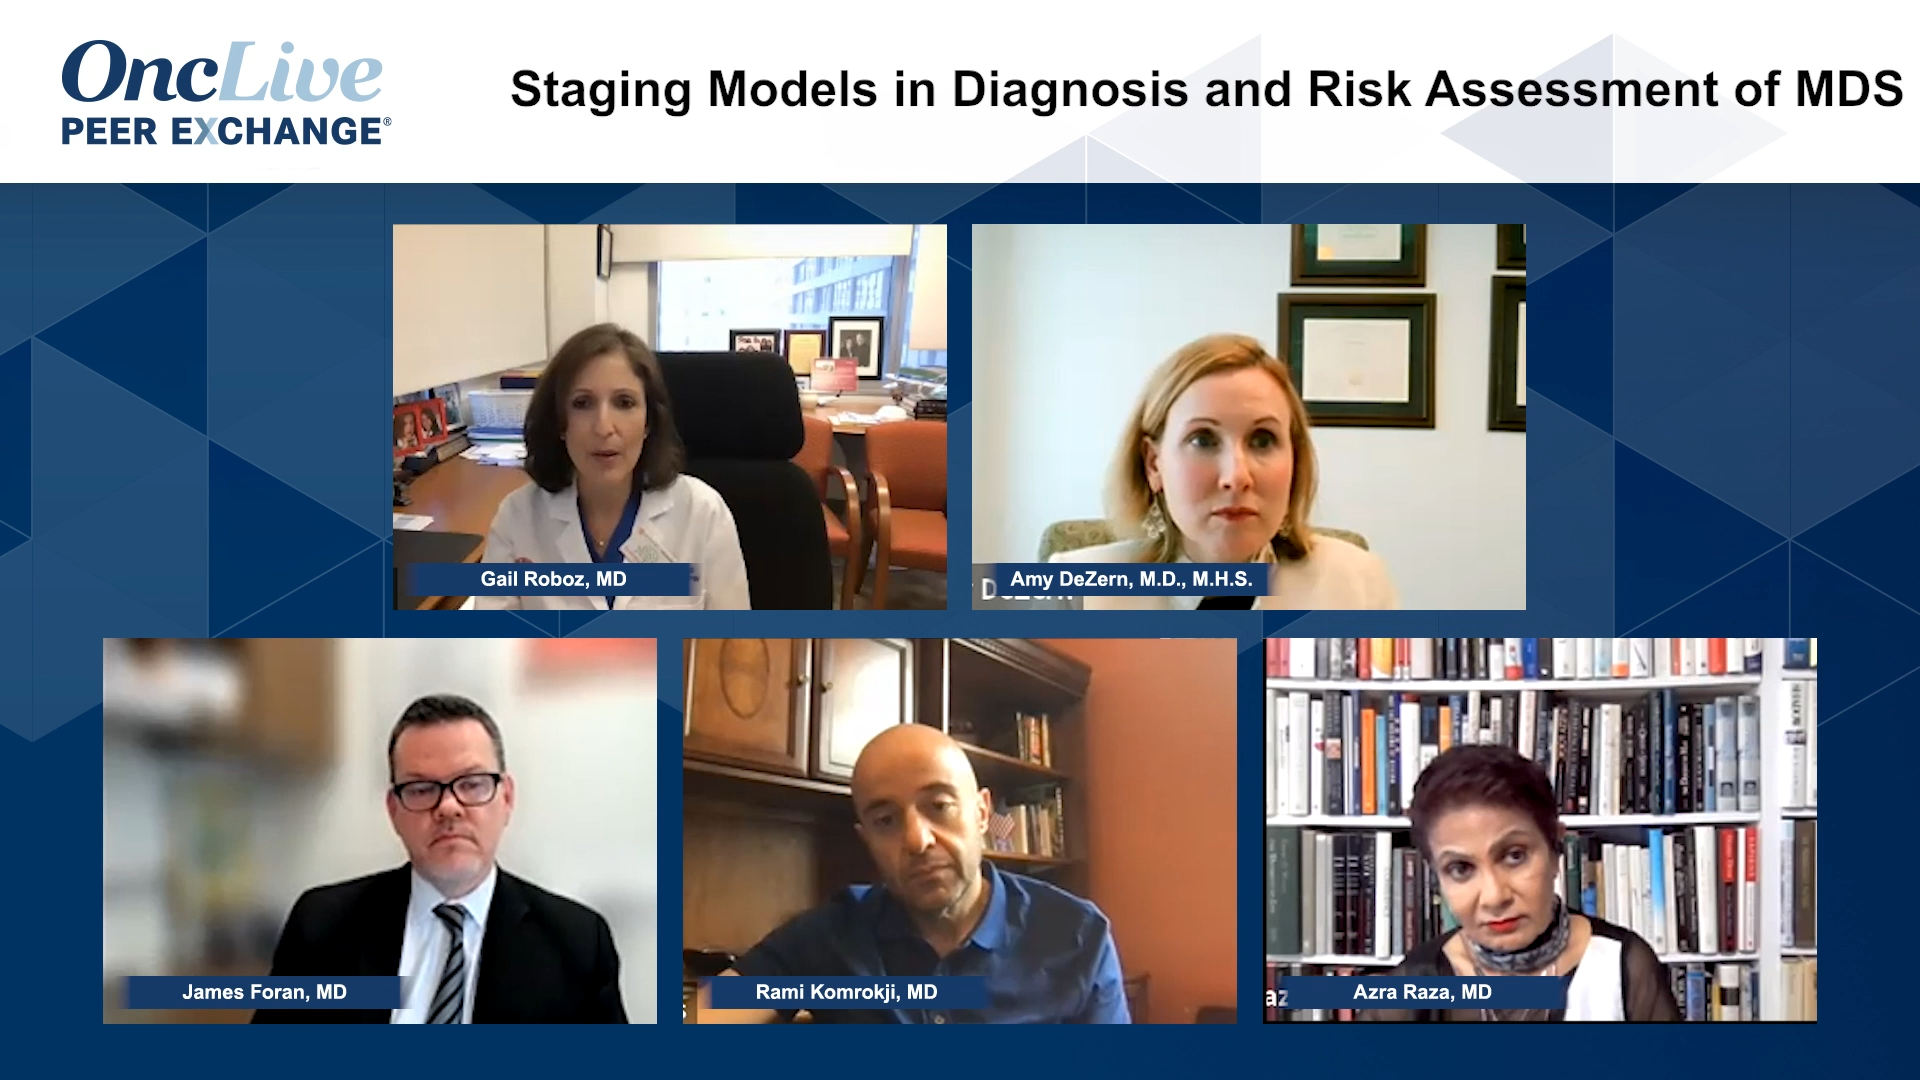 Staging Models in Diagnosis and Risk Assessment of MDS